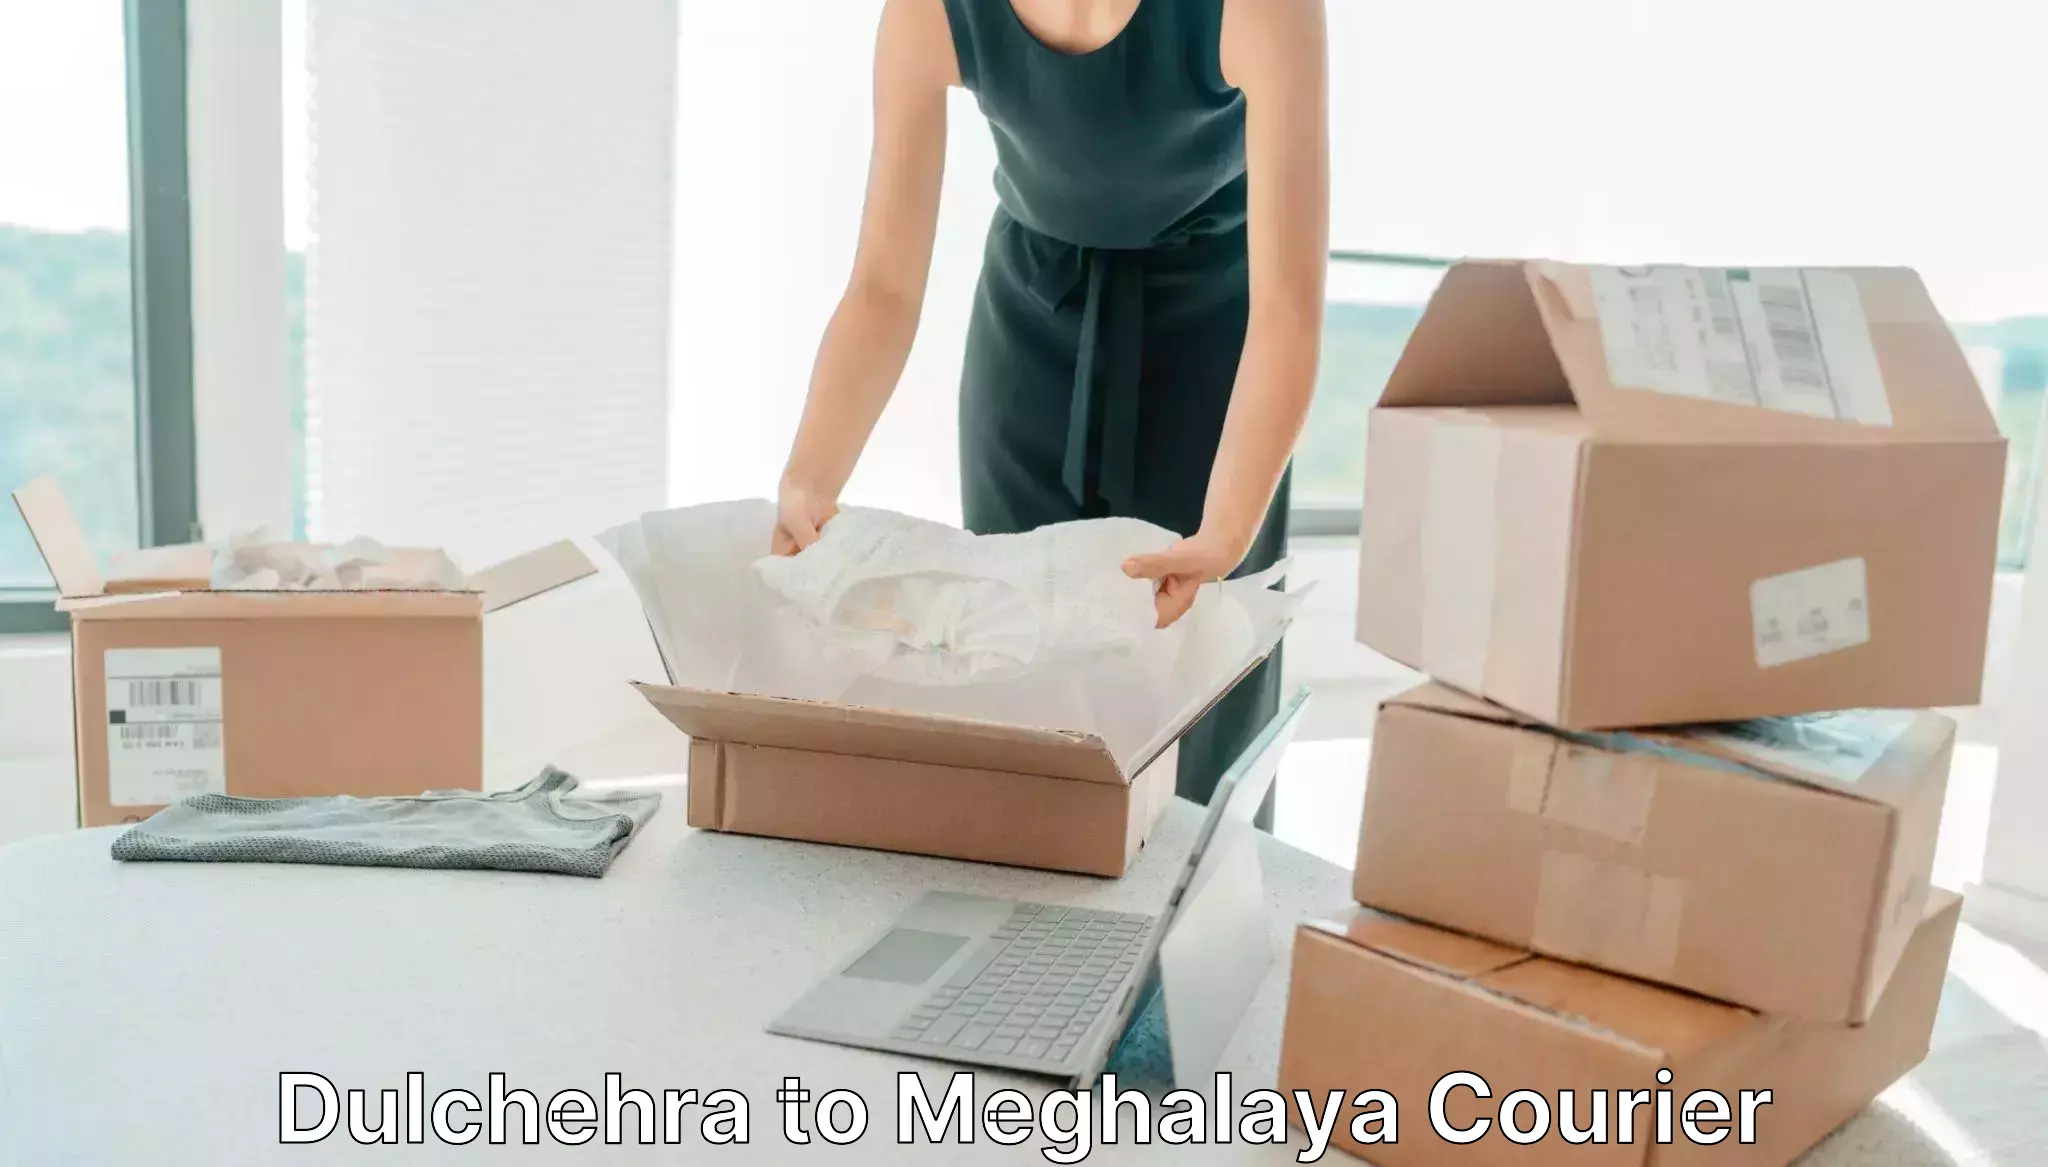 Express delivery solutions in Dulchehra to Meghalaya